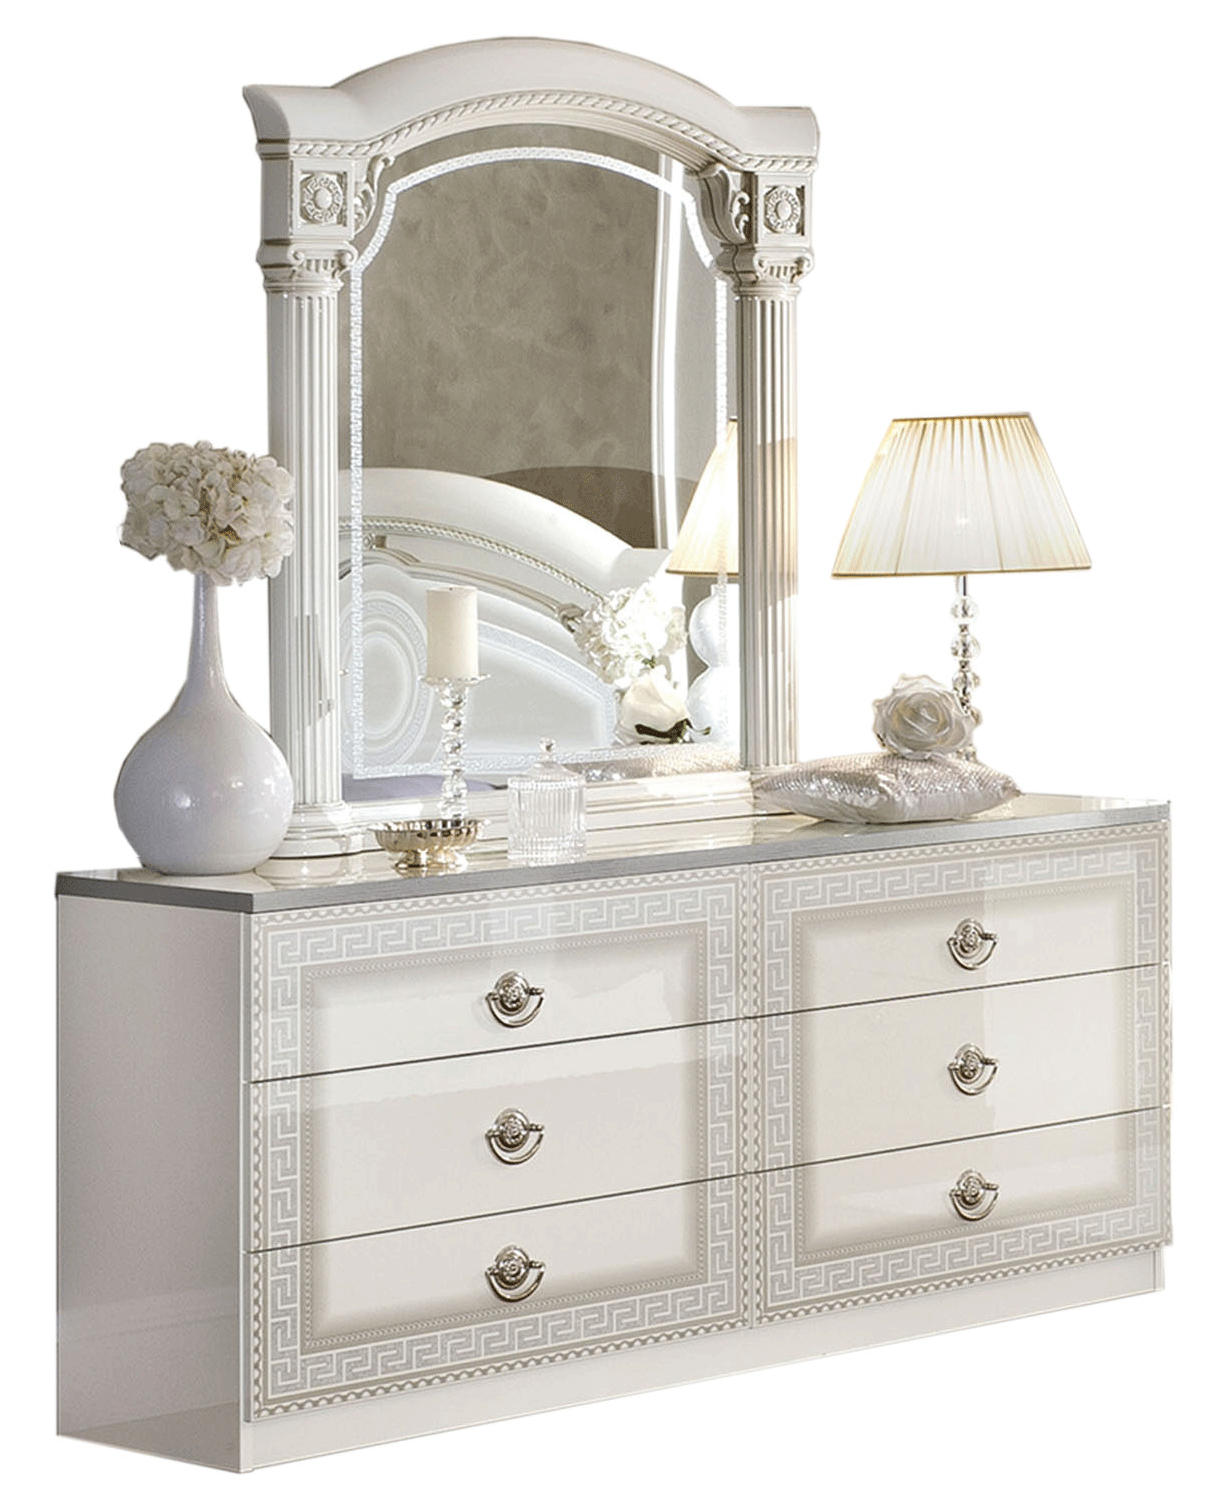 Brands Camel Classic Collection, Italy Aida White Silver Dresser